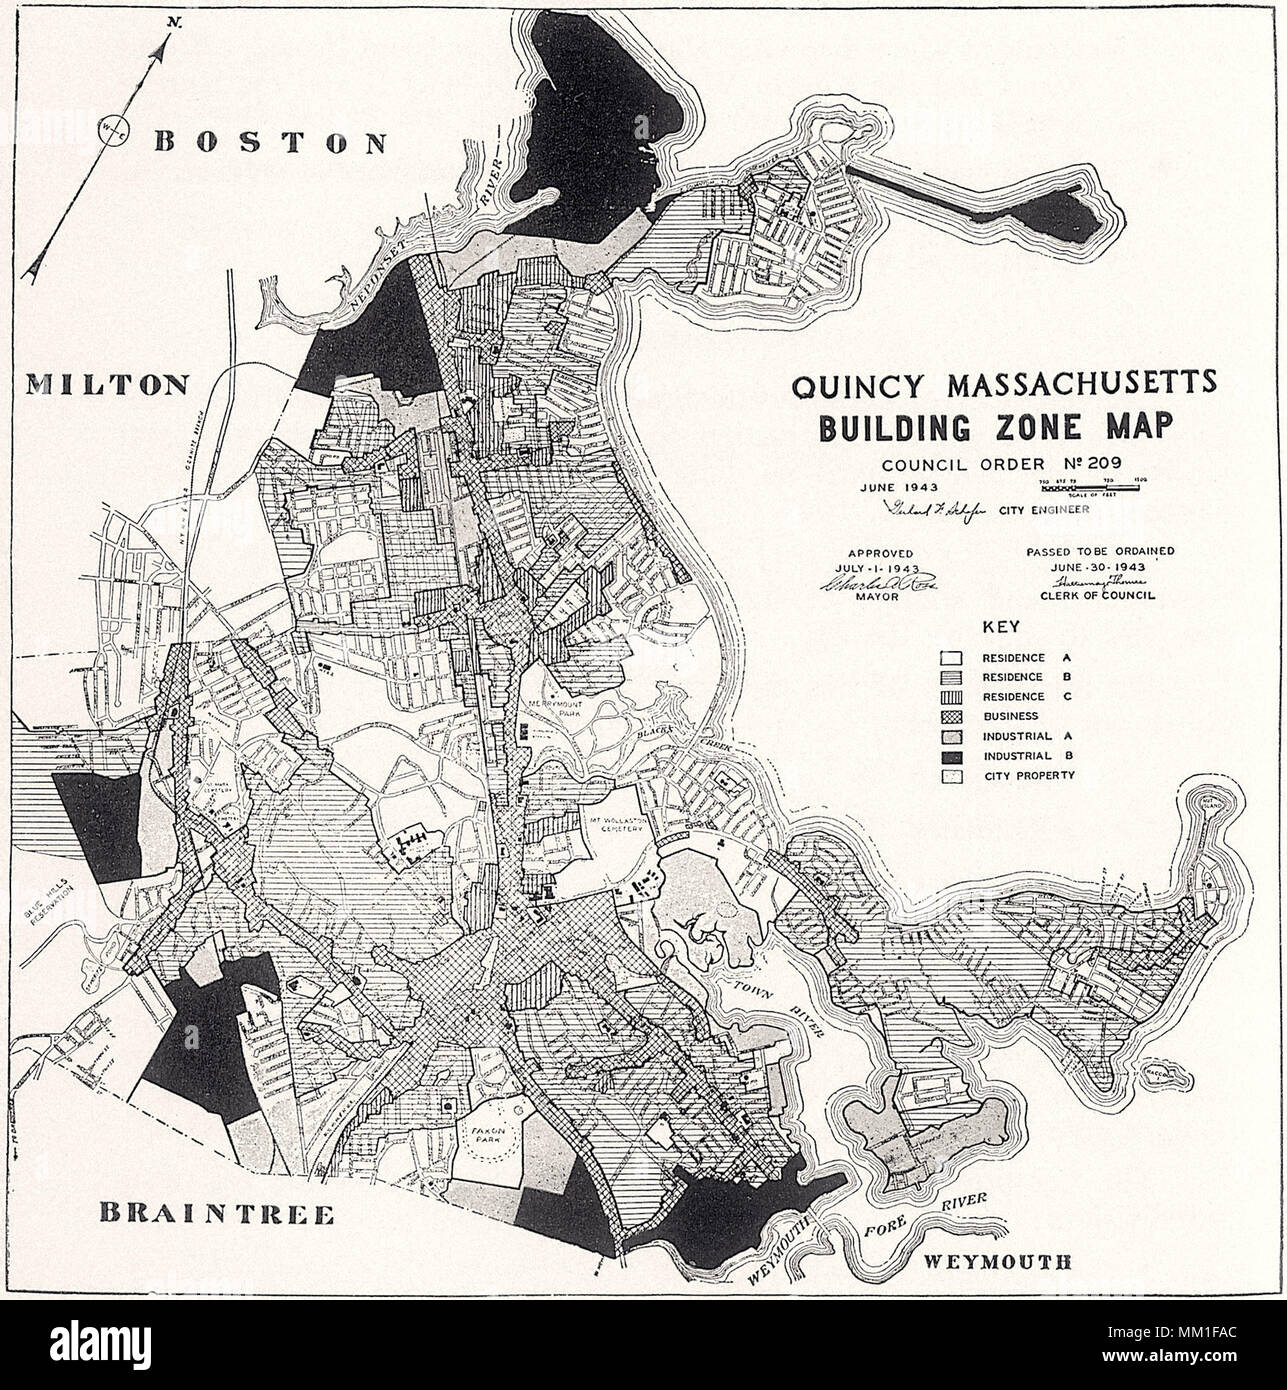 Building Zone Map of Quincy. 1943 Stock Photo